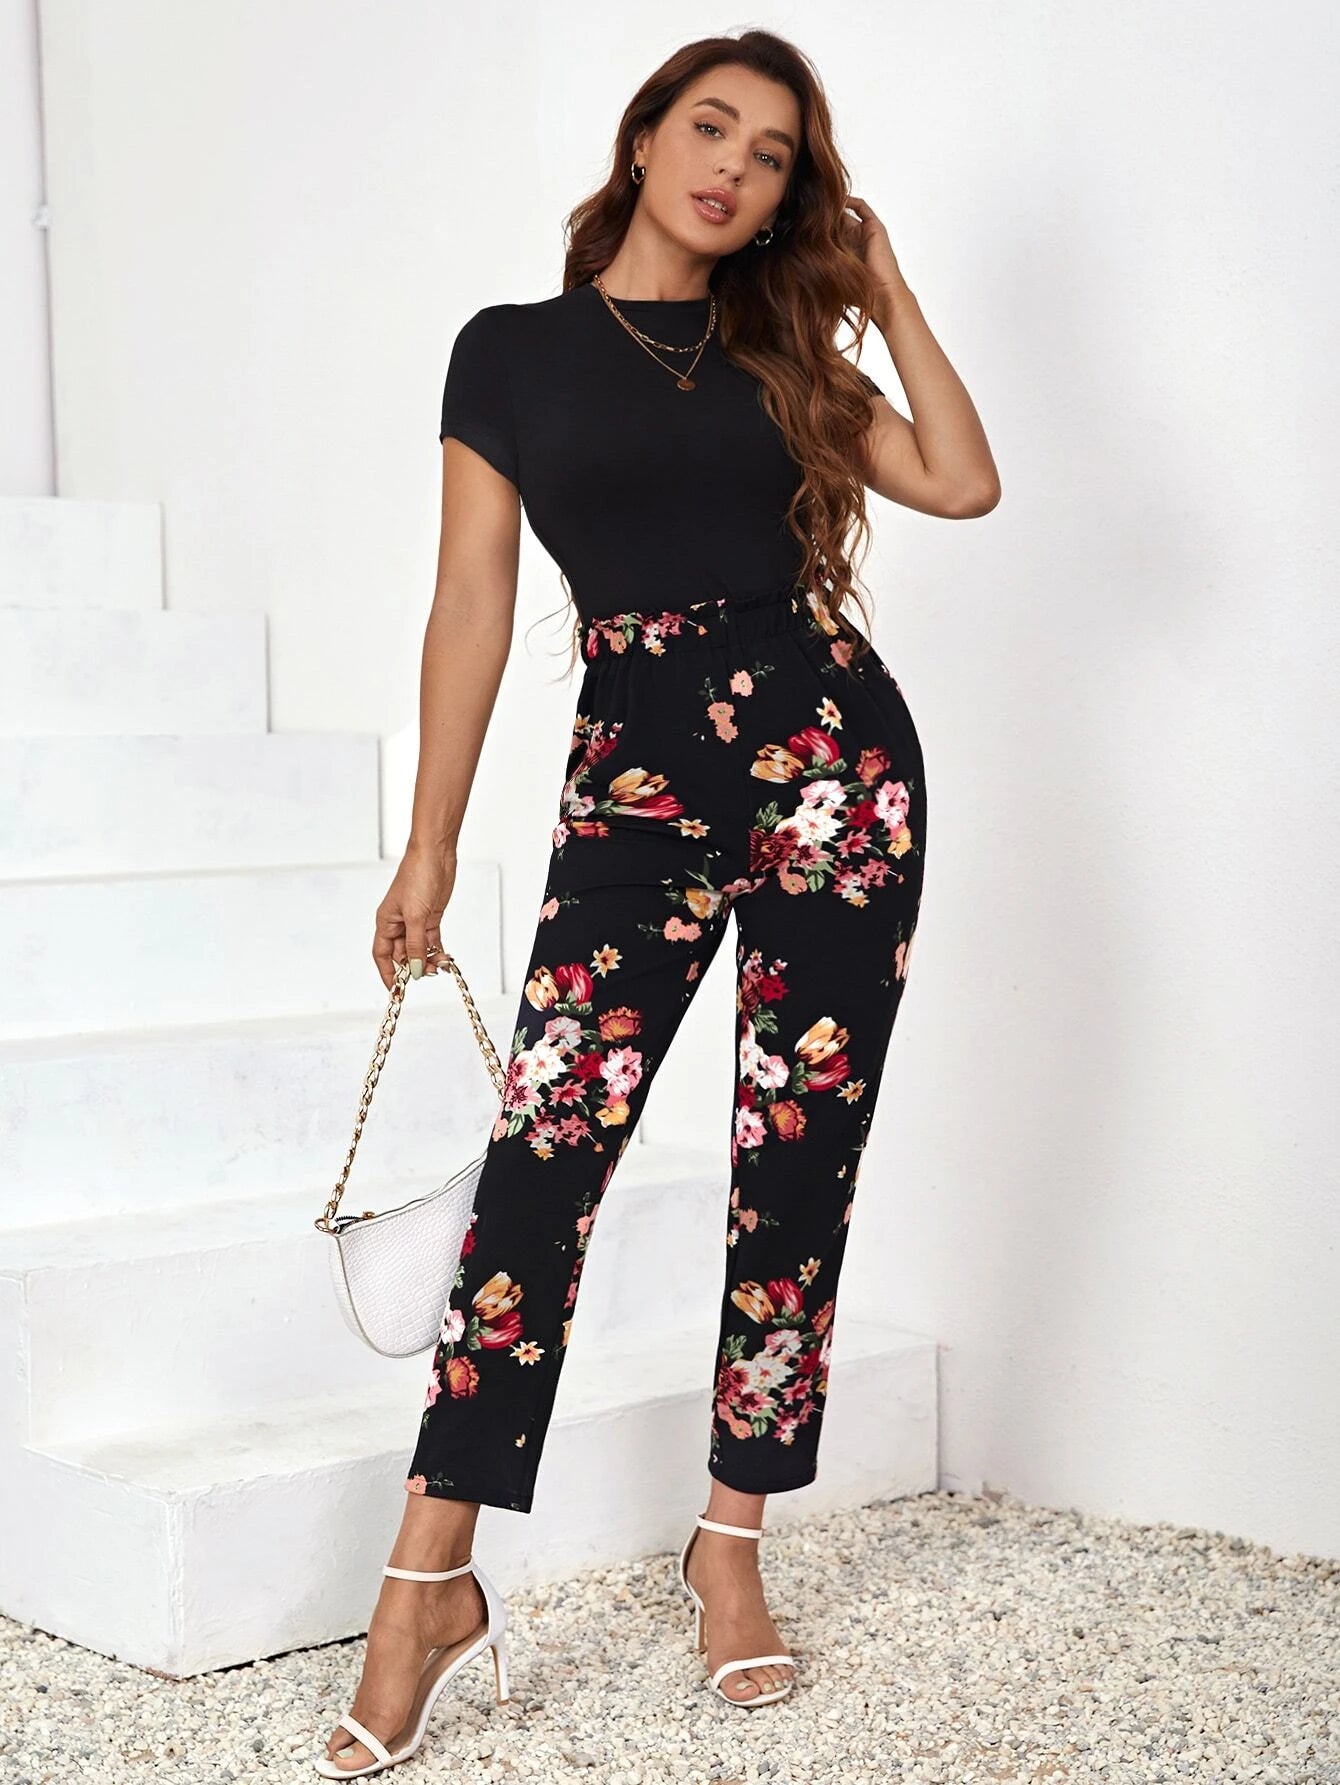 Solid Round Neck Tee & Floral Print Pants